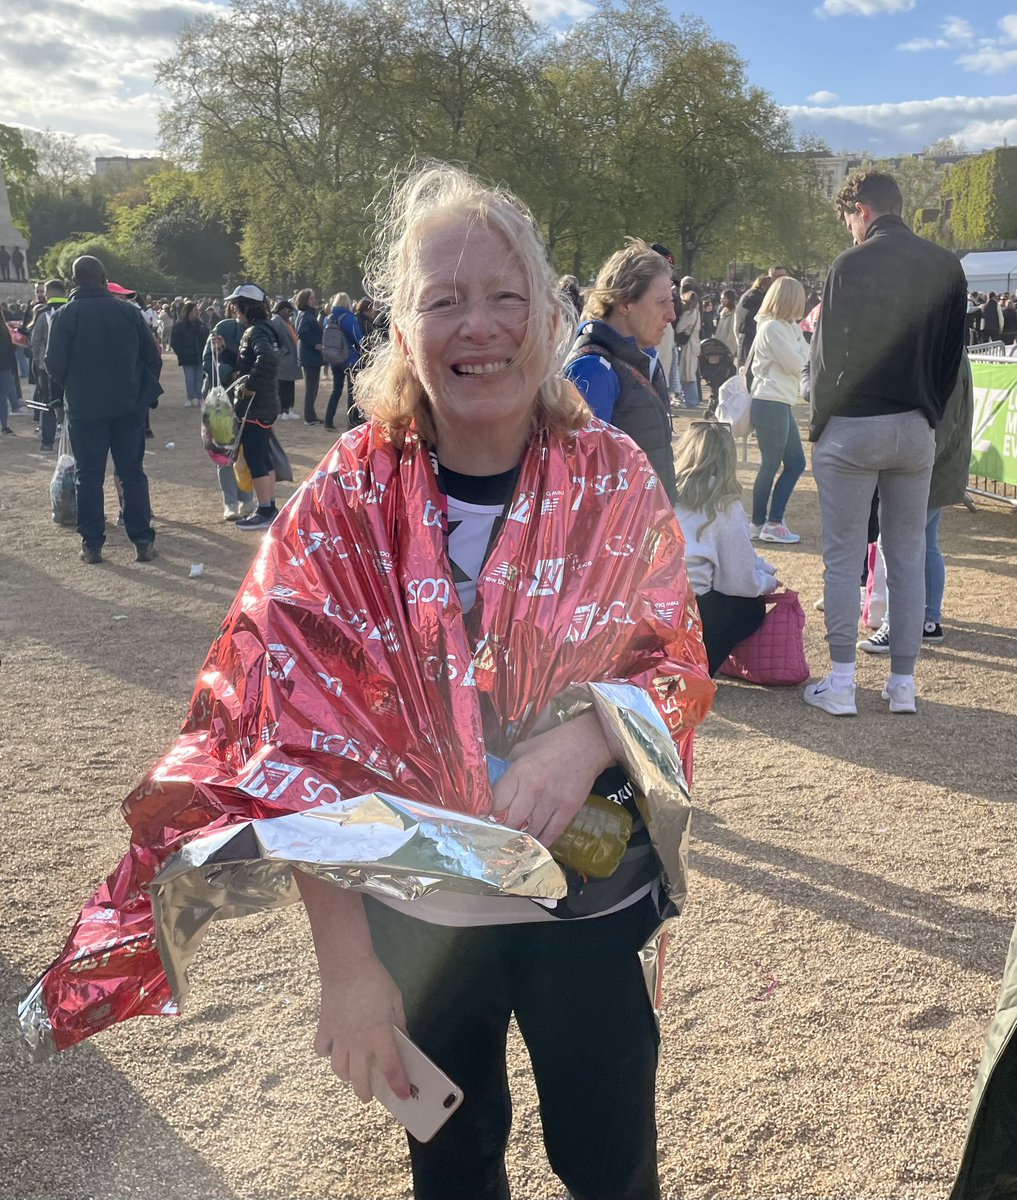 Well, all safely done @LondonMarathon Am very pleased with how it went, although can’t actually walk now… Want to thank my awesome donors. You have all been so generous. You have changed lives today #TeamShelter @Shelter Thankyou to every single one.